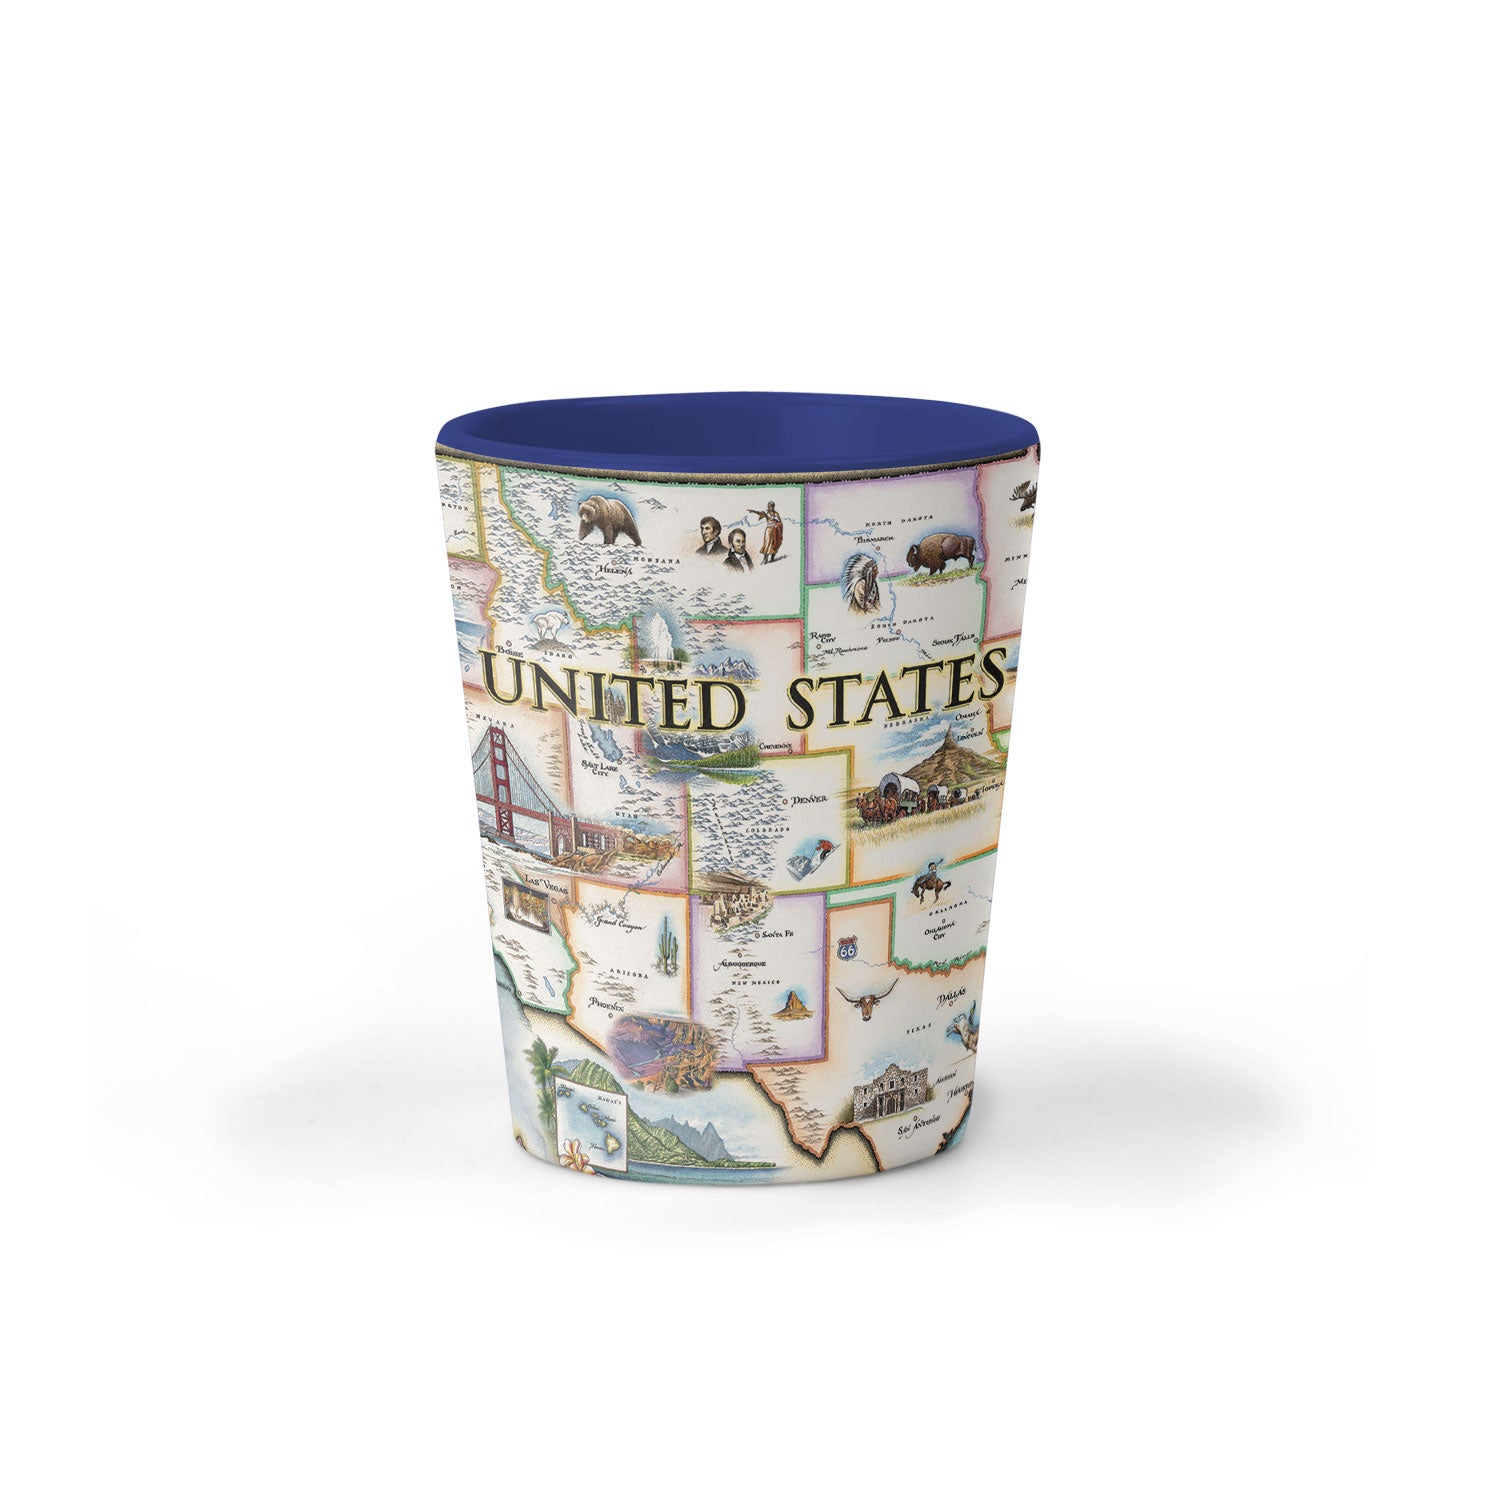 USA Map Ceramic shot glass by Xplorer Maps. The map features illustrations of significance from each state in the United States of America. Including a bald eagle, Elvis, bison, the Golden Gate Bridge, the Space Needle, Niagara Falls, and the Alamo. 